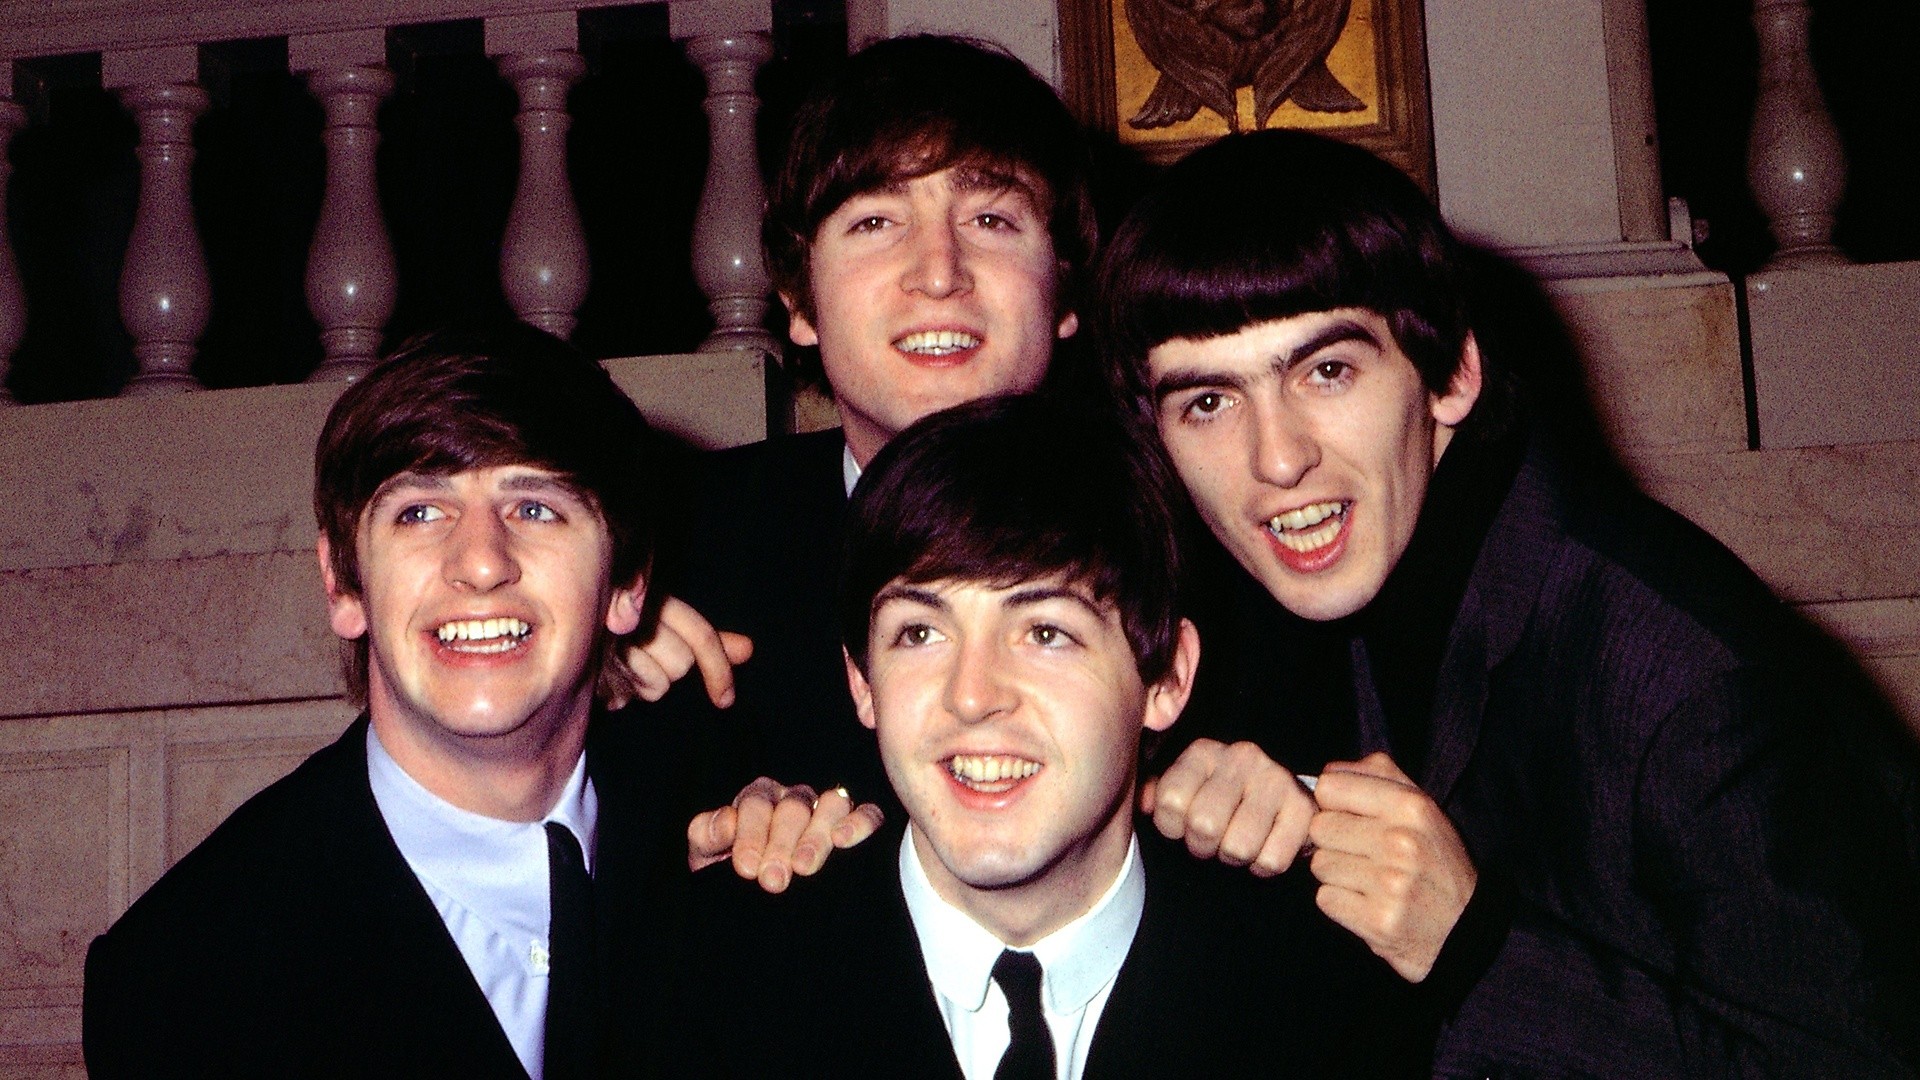 The Beatles' “Now and Then”: Music video for new song is an